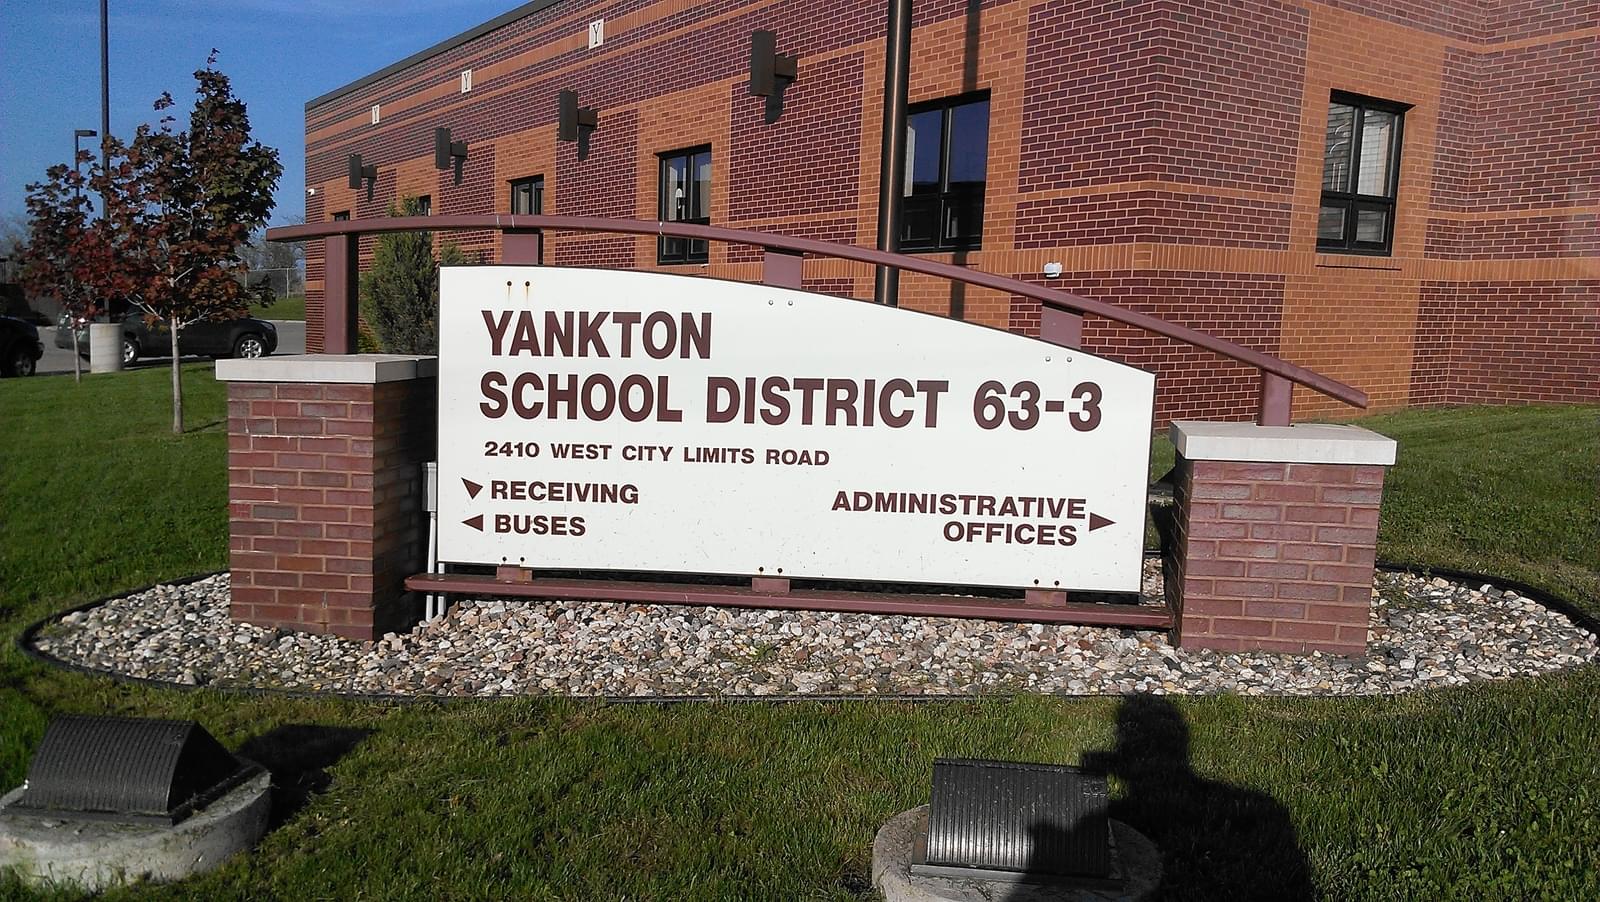 Homecoming Parade Plan Revealed For Yankton School District